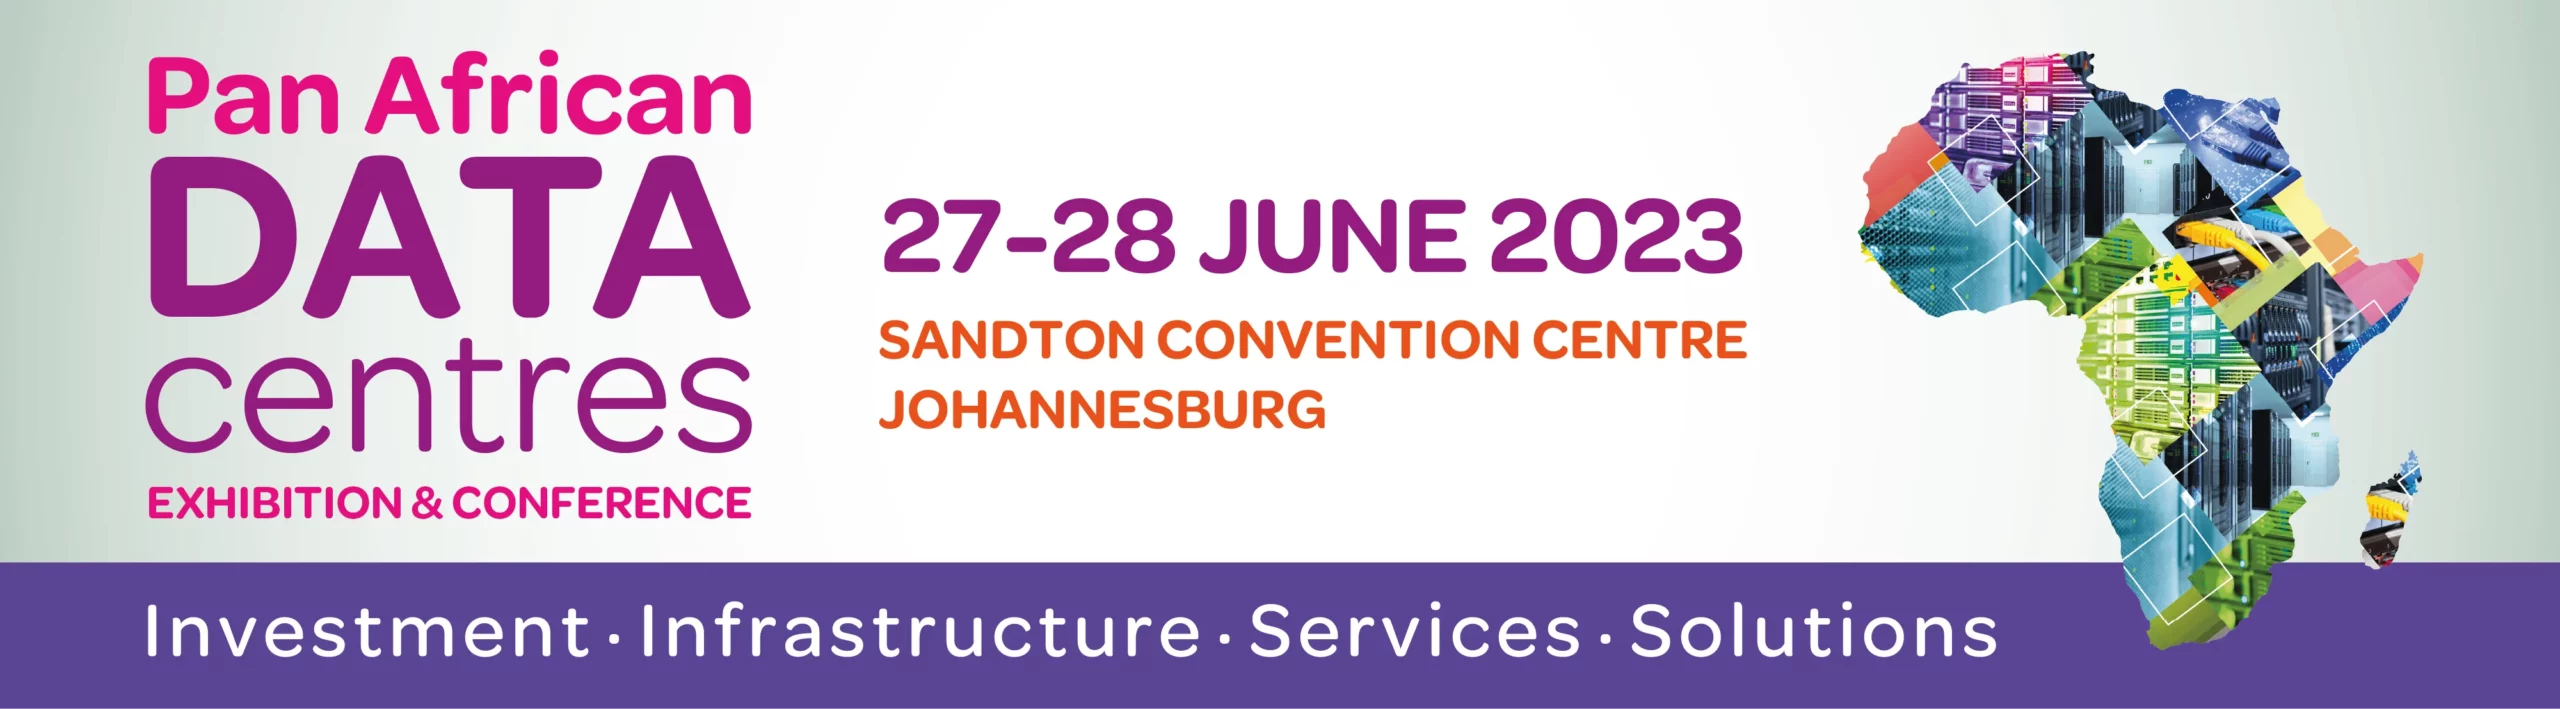 Paratus Africa - Pan Africa Data Centres Exhibition Conference